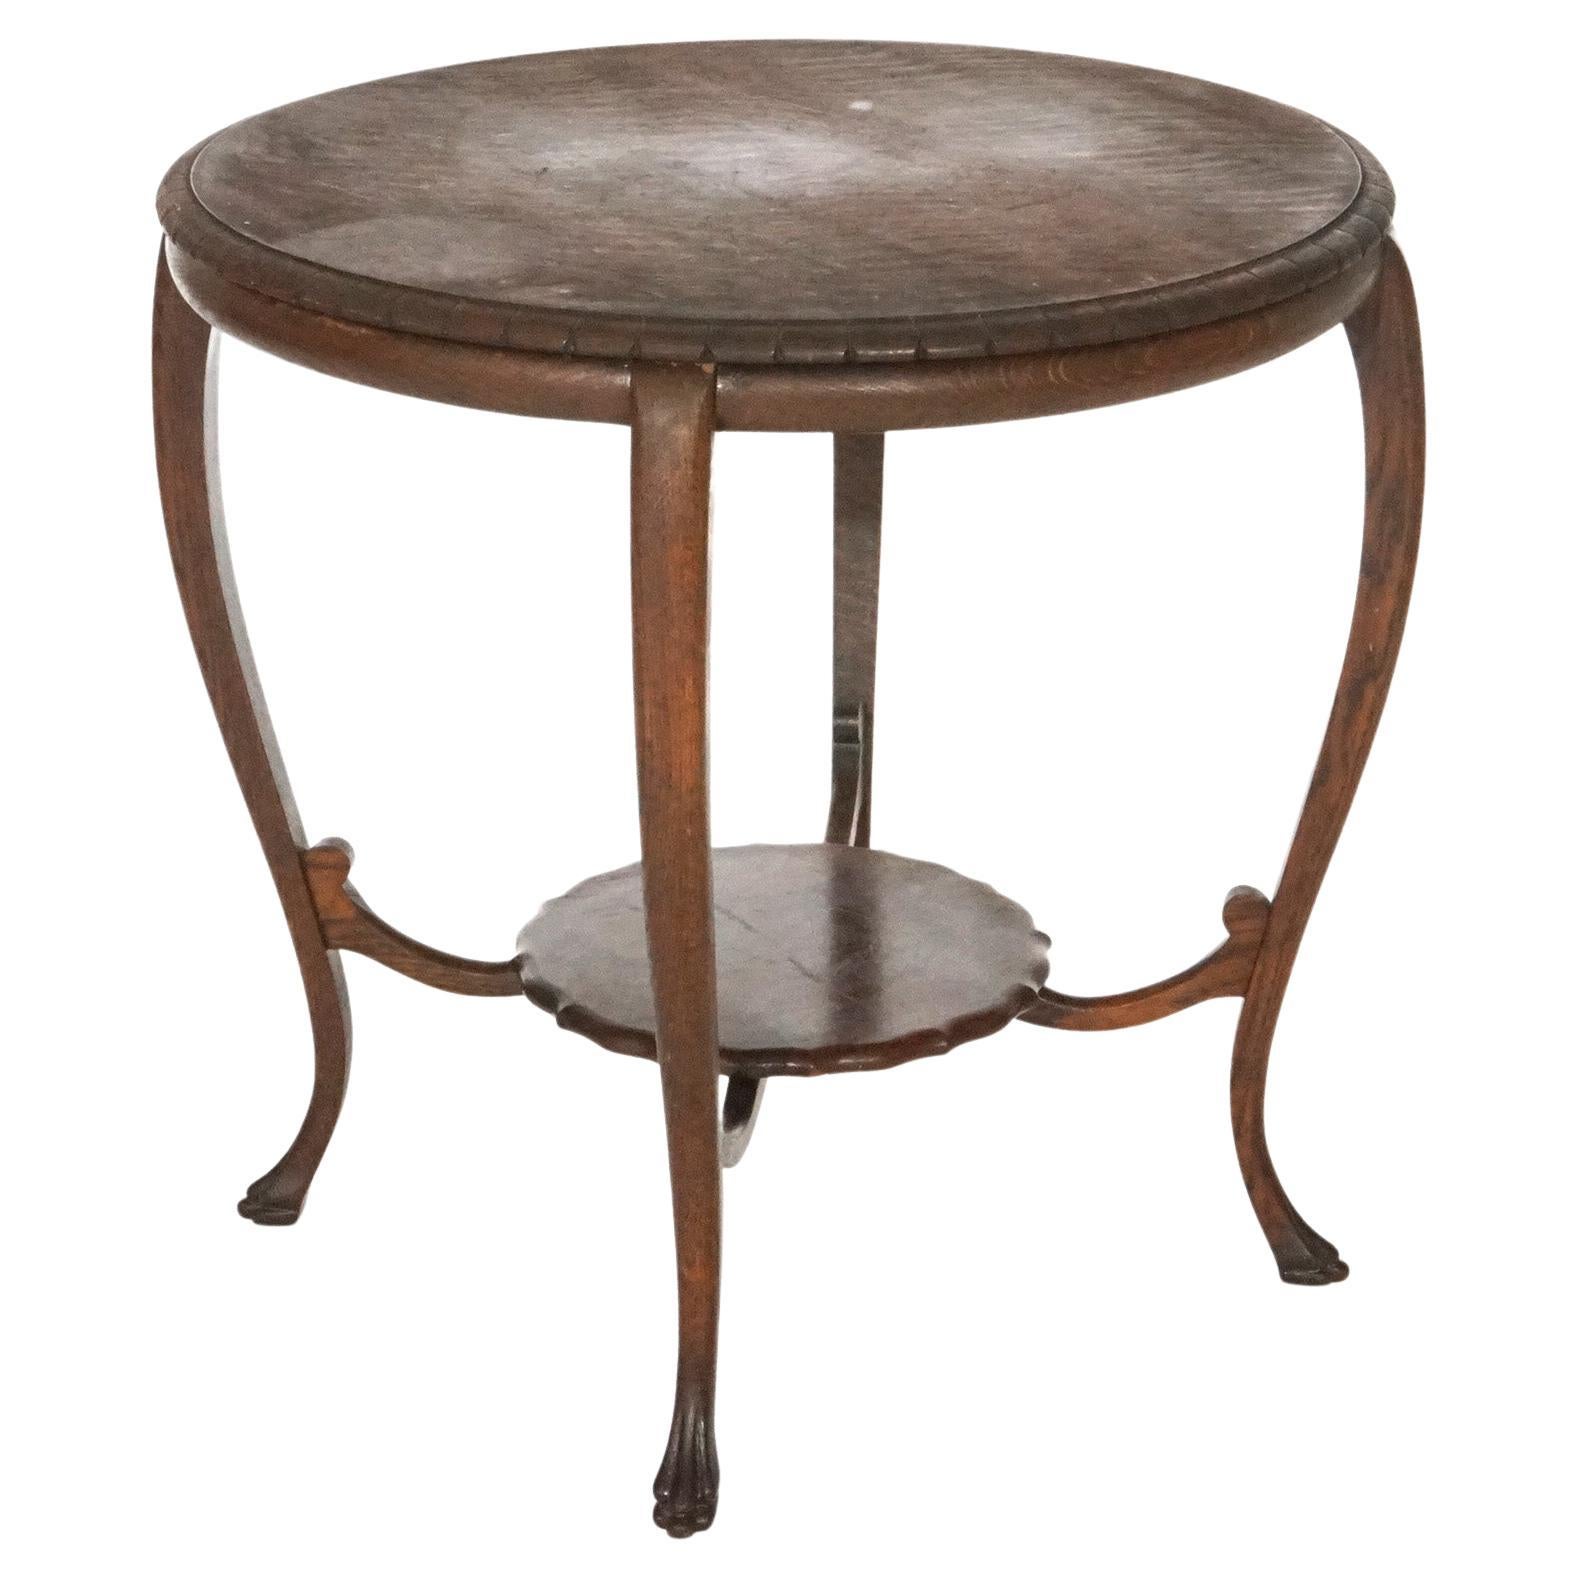 Antique Quartersawn Oak Parlor Table with Paw Feet, Circa 1900 For Sale